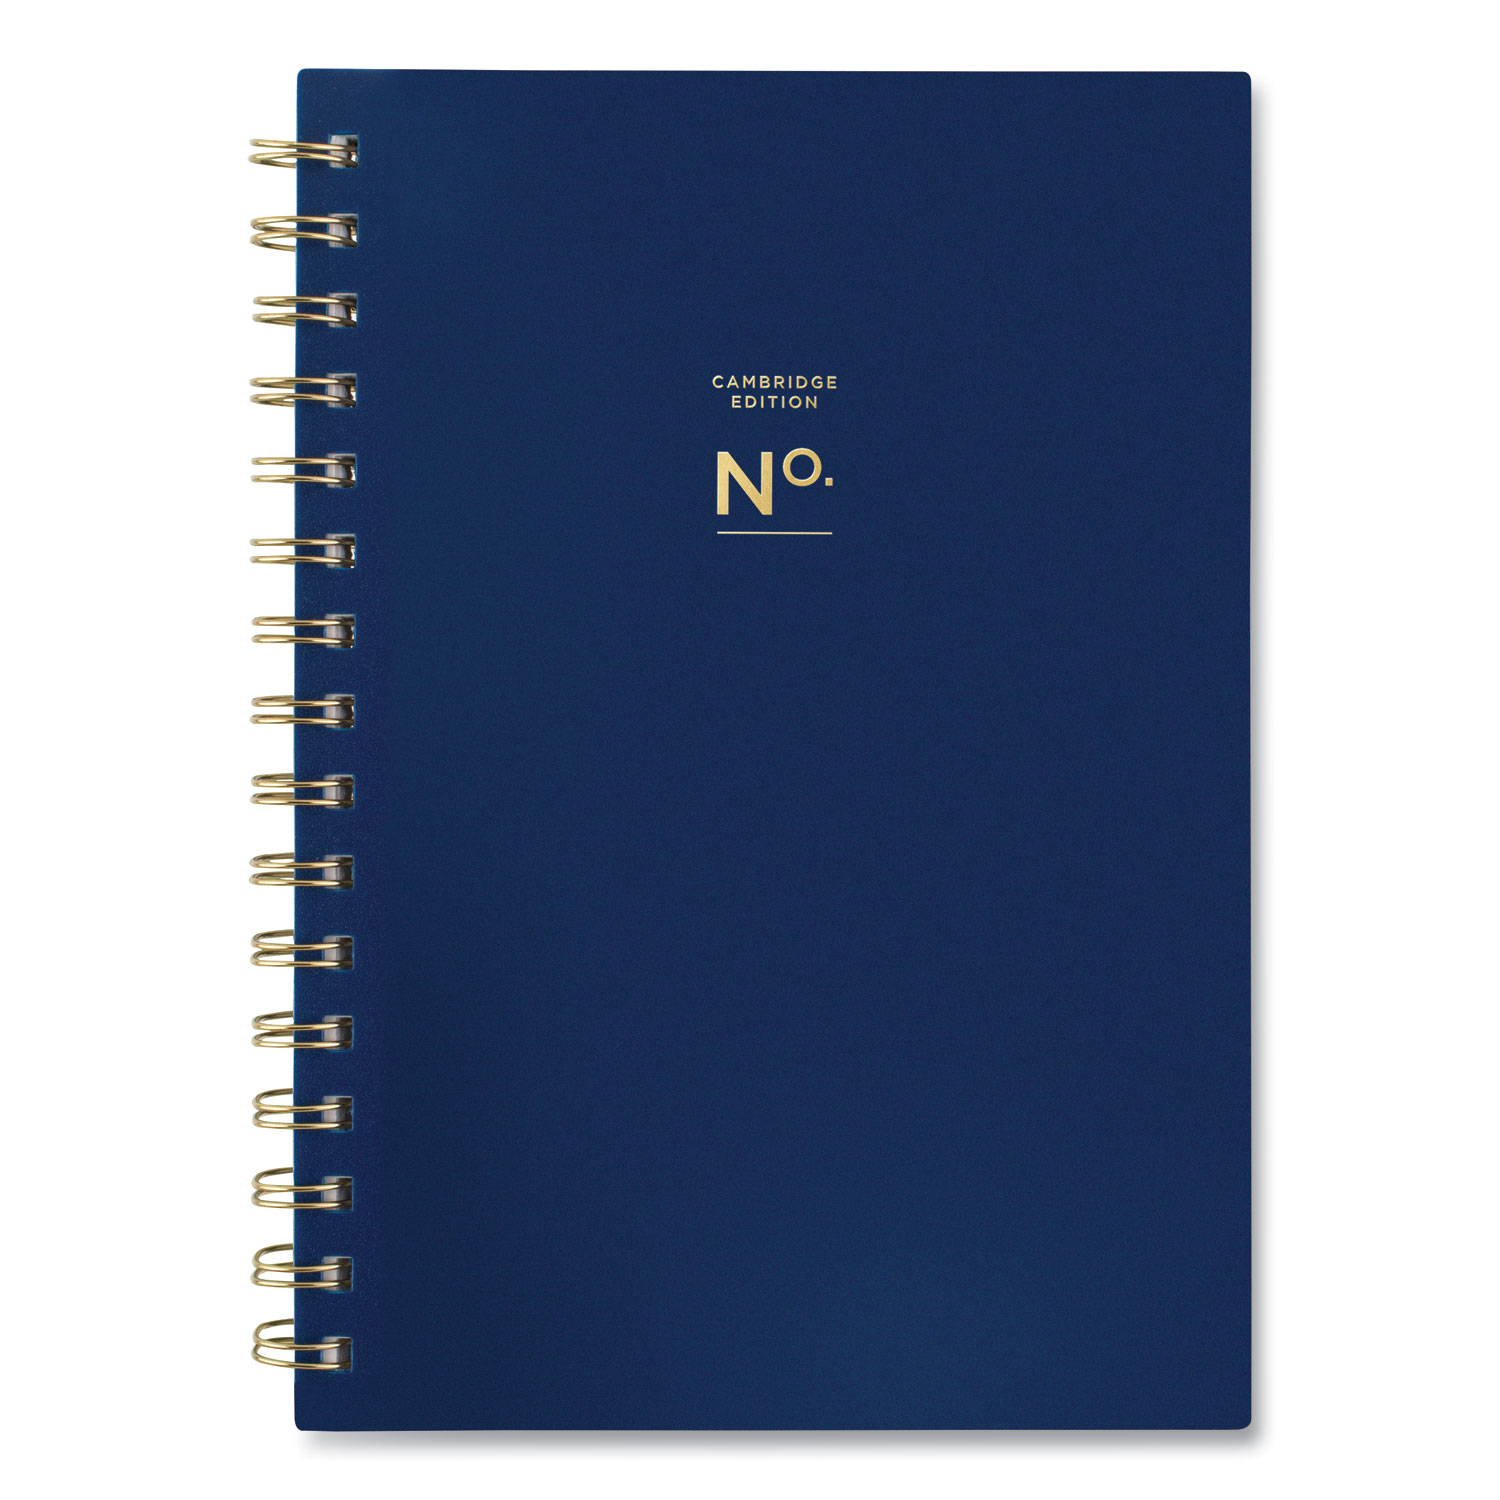  Cambridge 147920058 Workstyle Weekly/Monthly Planner, 8.5 x 5.5, Navy, 2021 (AAG147920058) 